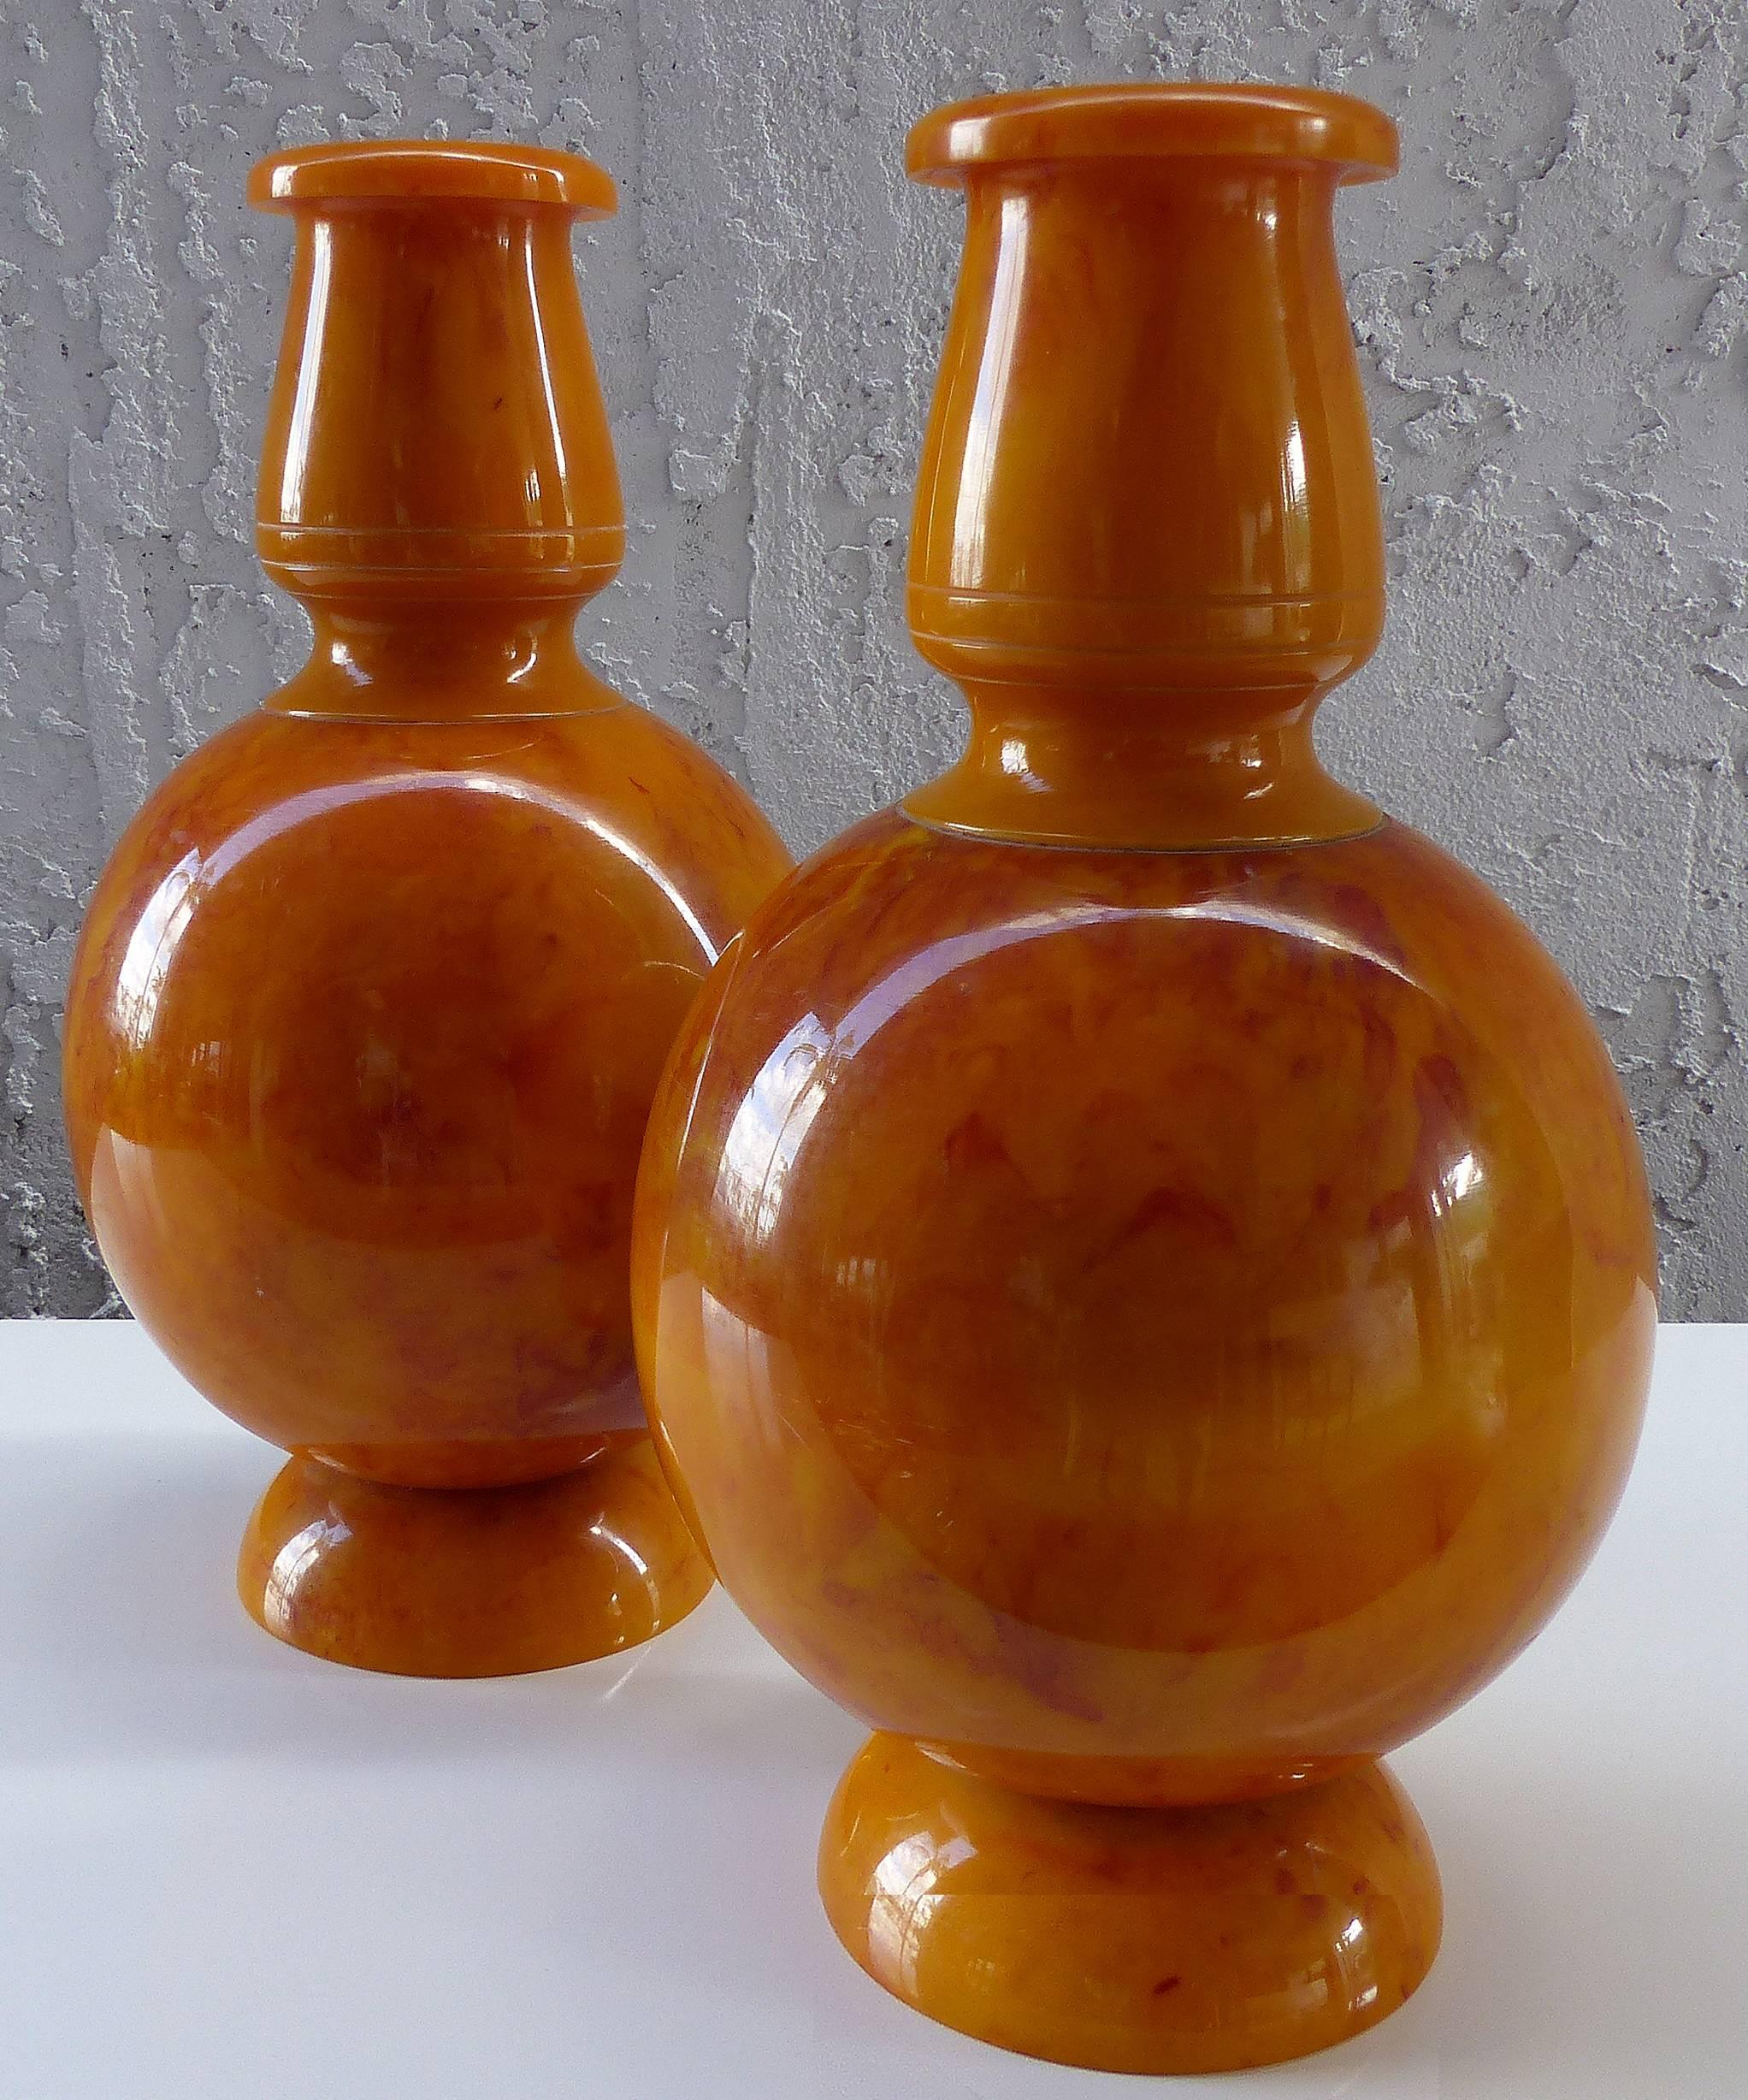 Offered for sale is a very unusual and rare pair of butterscotch Bakelite urns probably intended as fireplace garniture pieces. The pair is in excellent condition with highly polished finishes. Measures: Base, 4.25